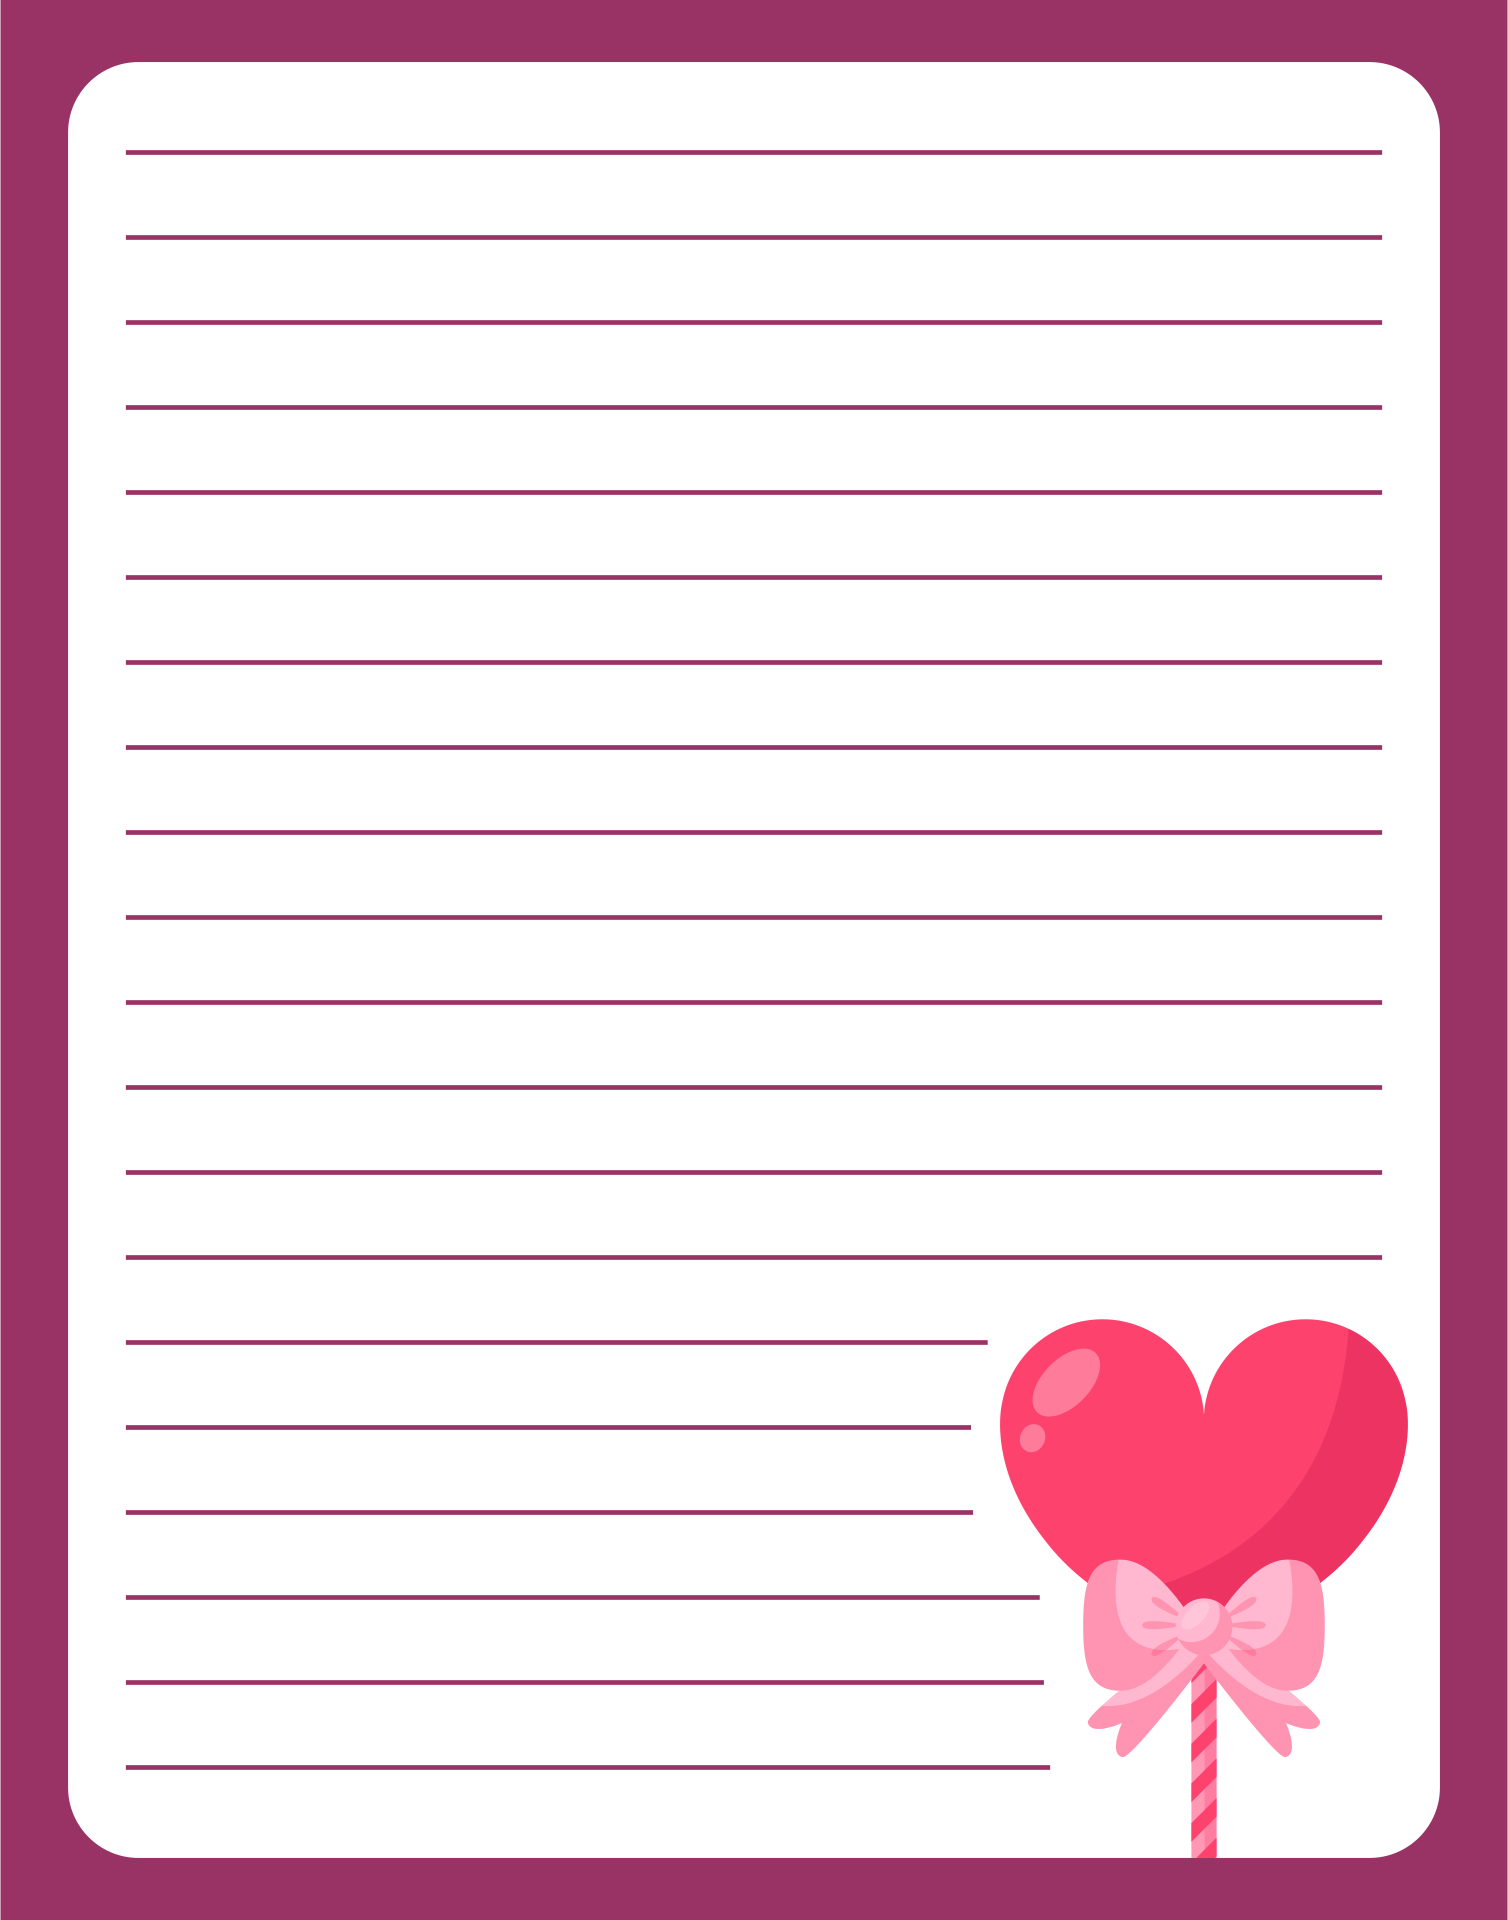 Free Printable Letter Writing Paper - Get What You Need For Free